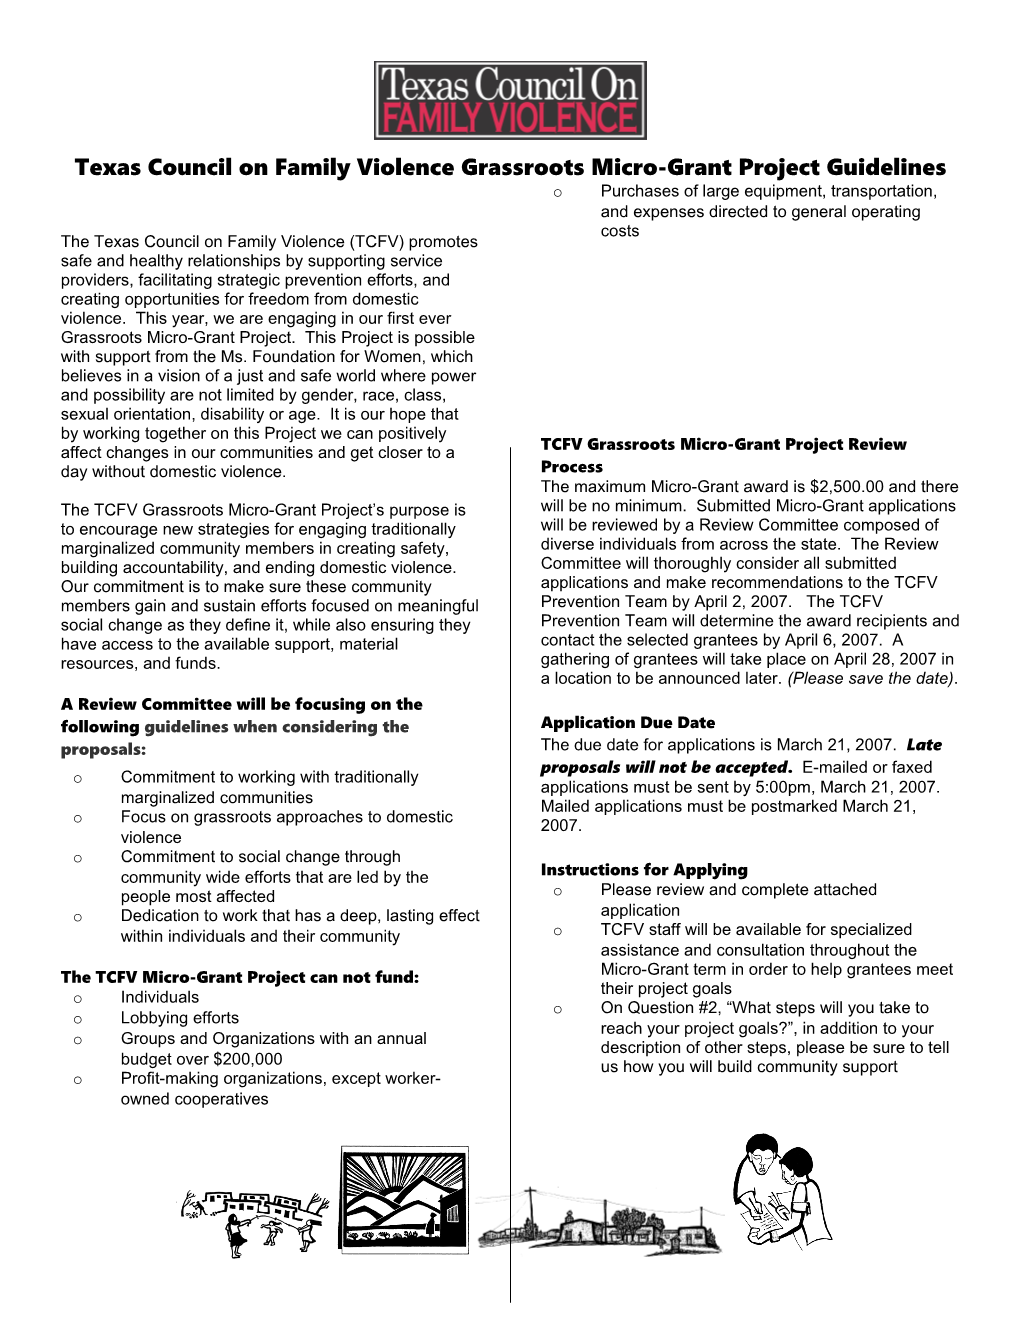 TCFV Grassroots Micro-Grant Project Guidelines